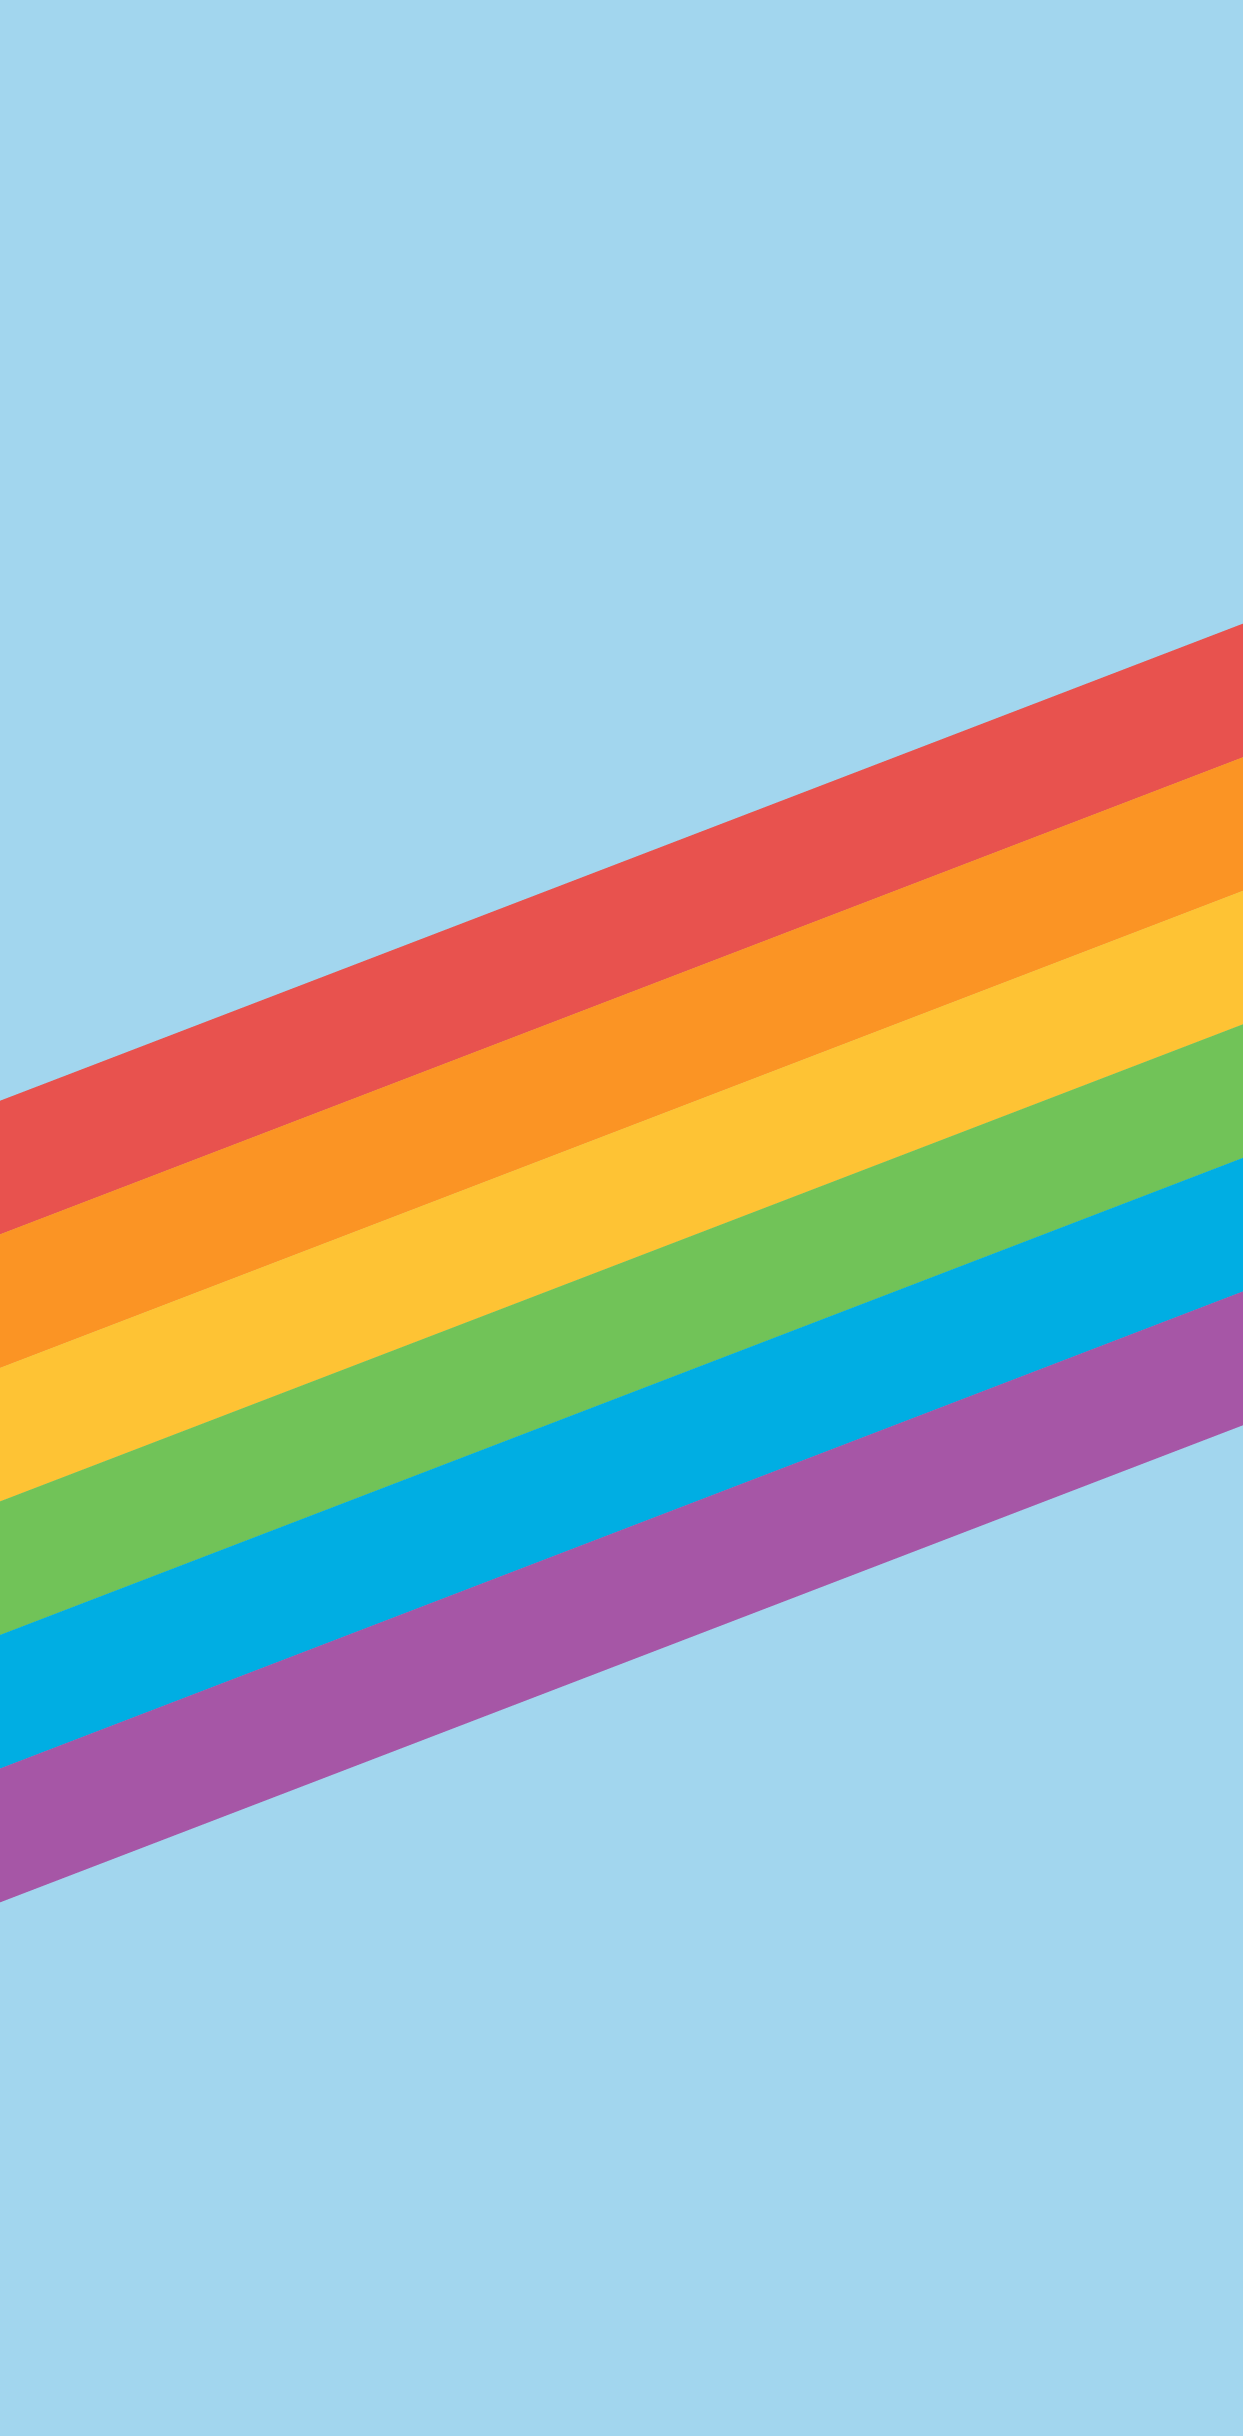 A blue background with a rainbow across the middle - Pride